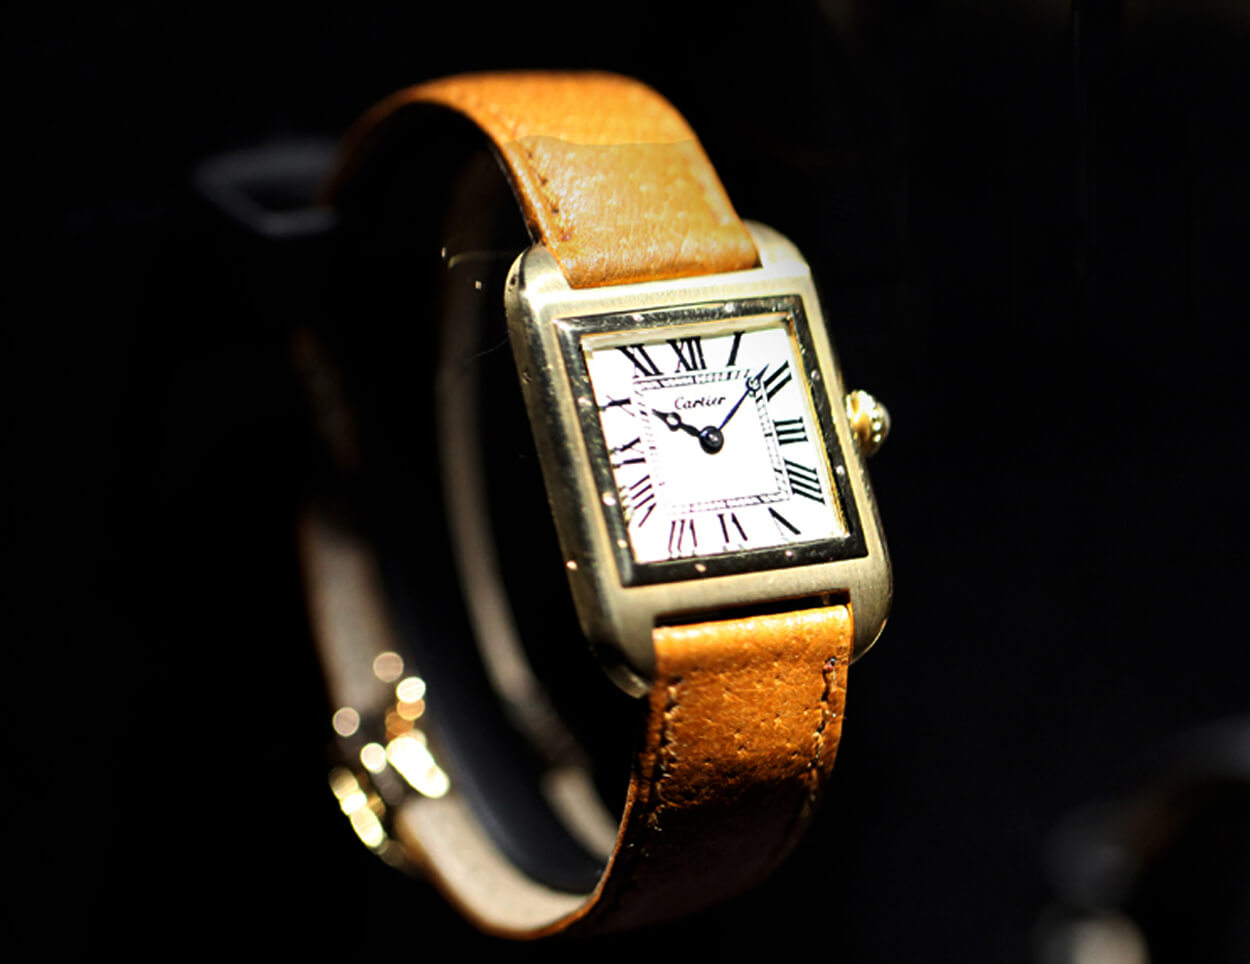 A Cartier Santos at the 'Cartier in Motion' exhibition at the London Design Museum